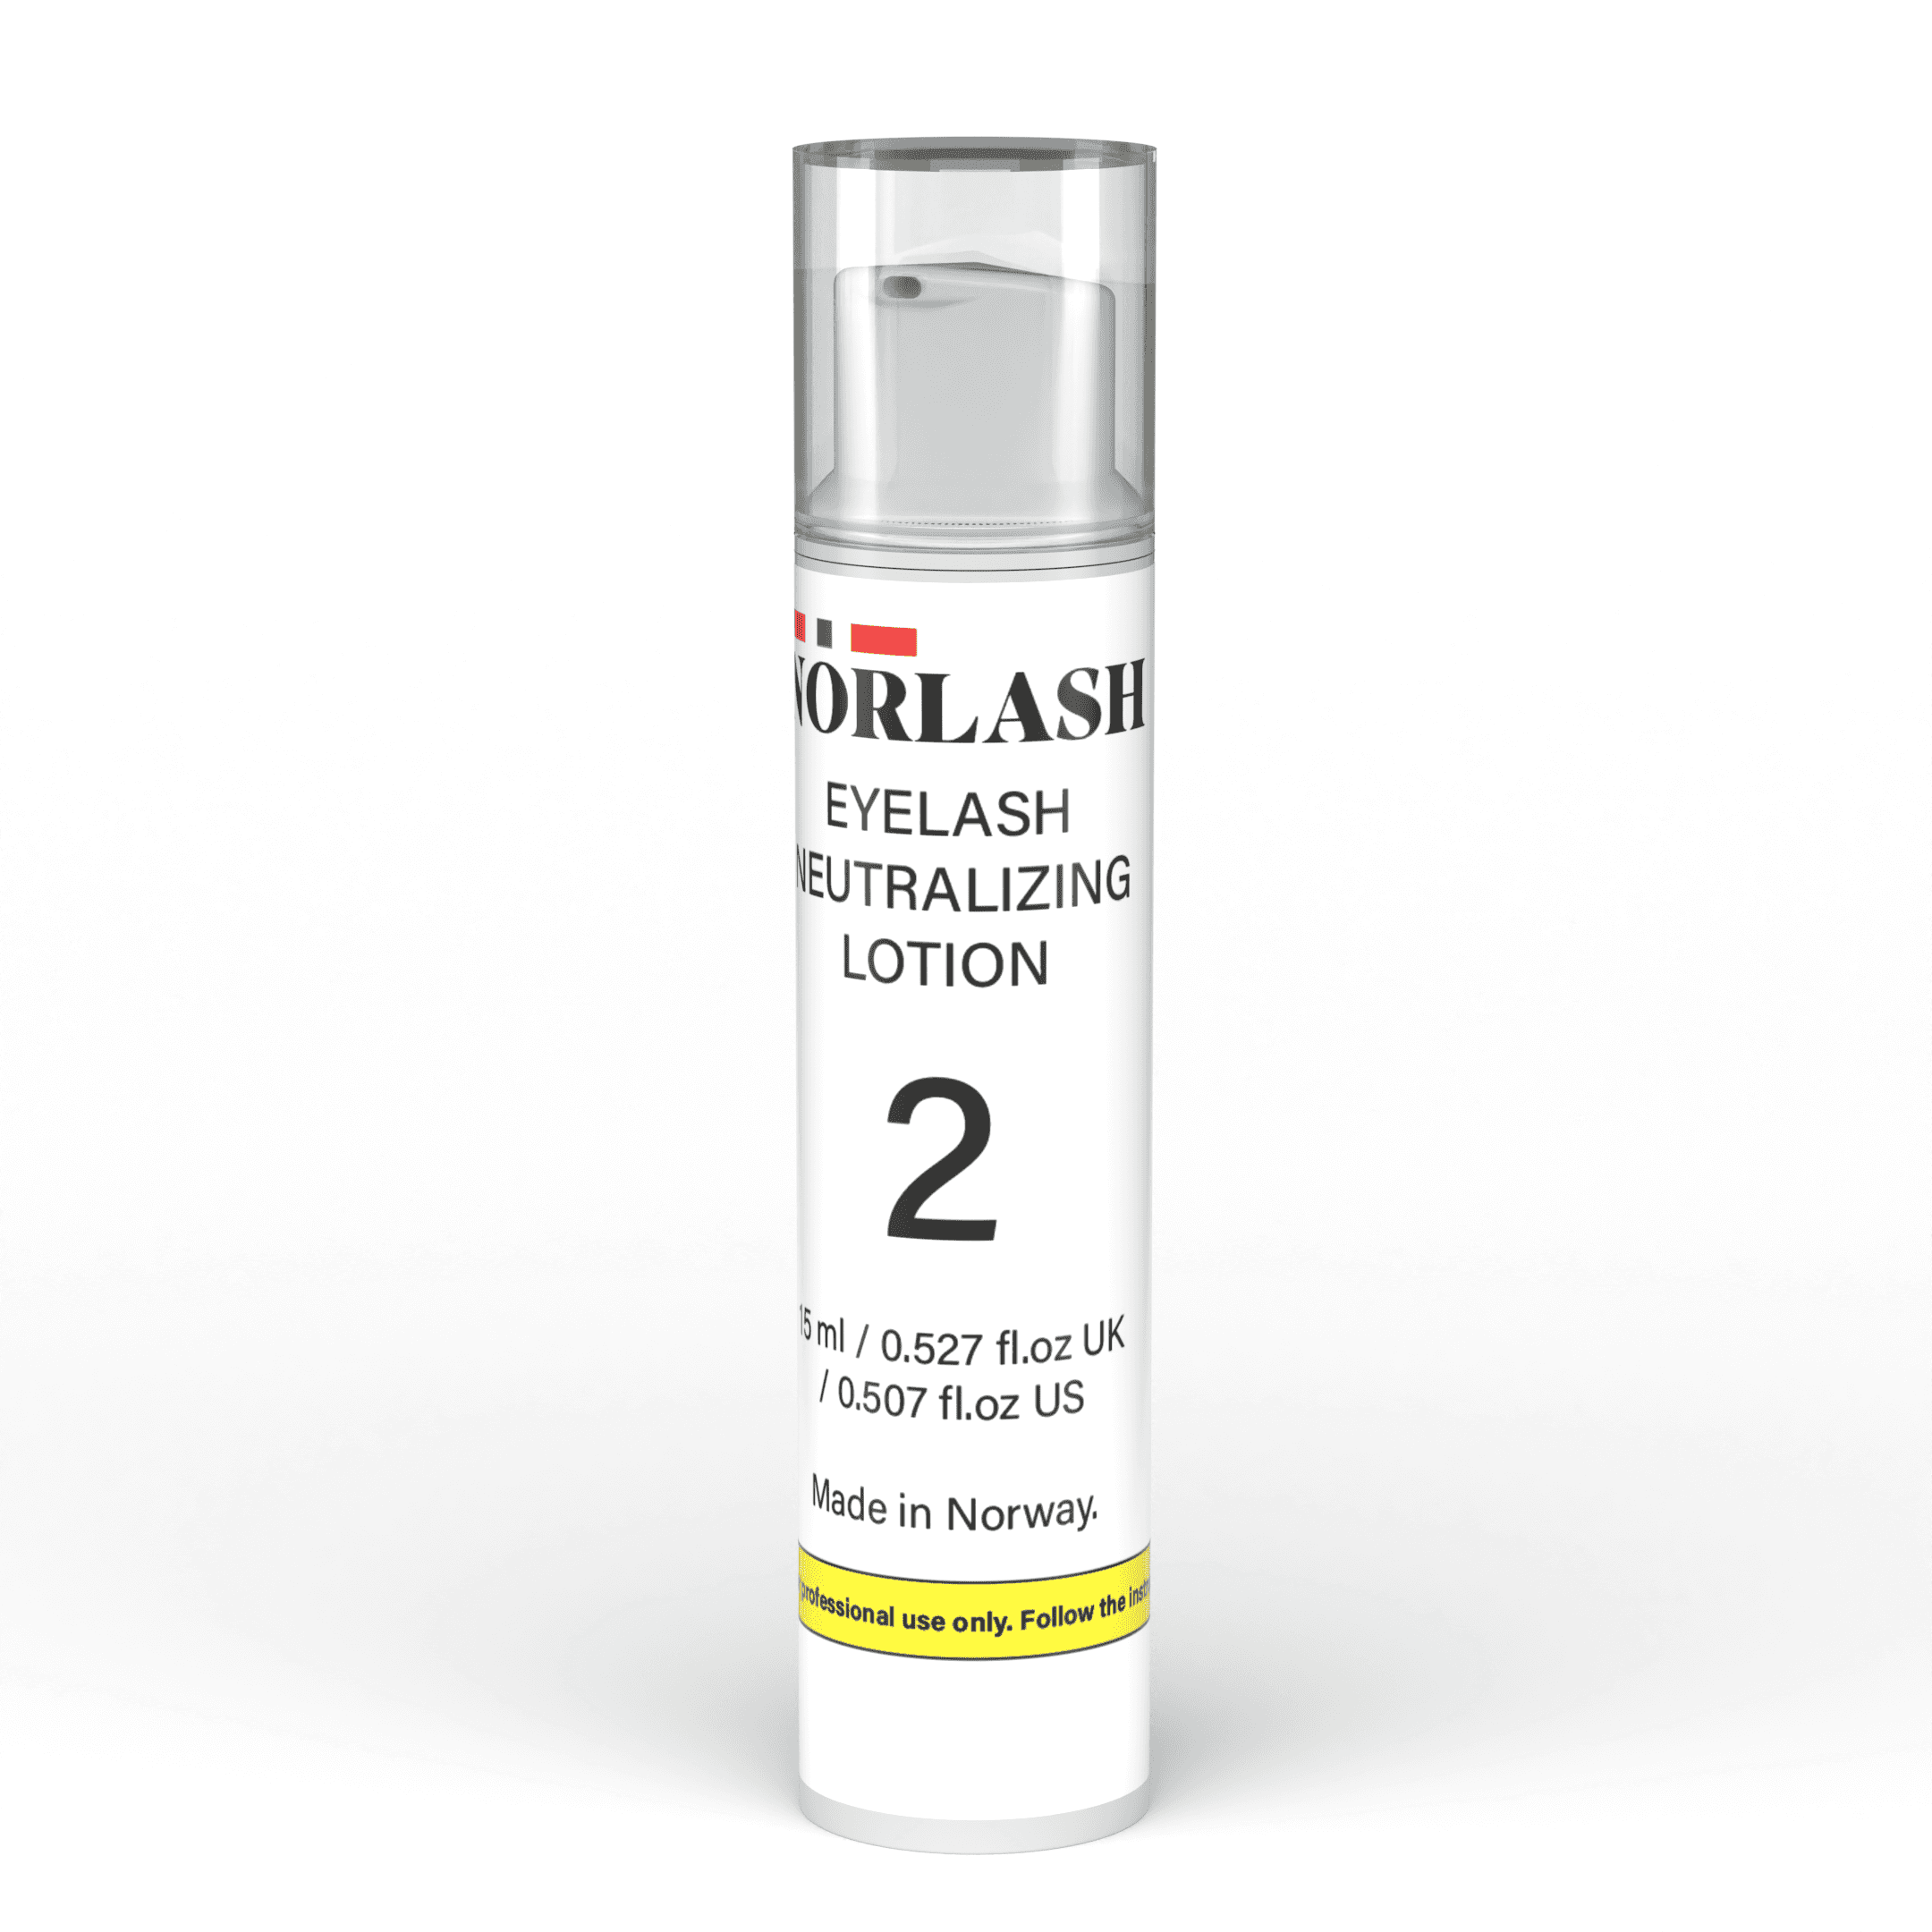 A bottle of NORLASH neturalizing lotion on a white background